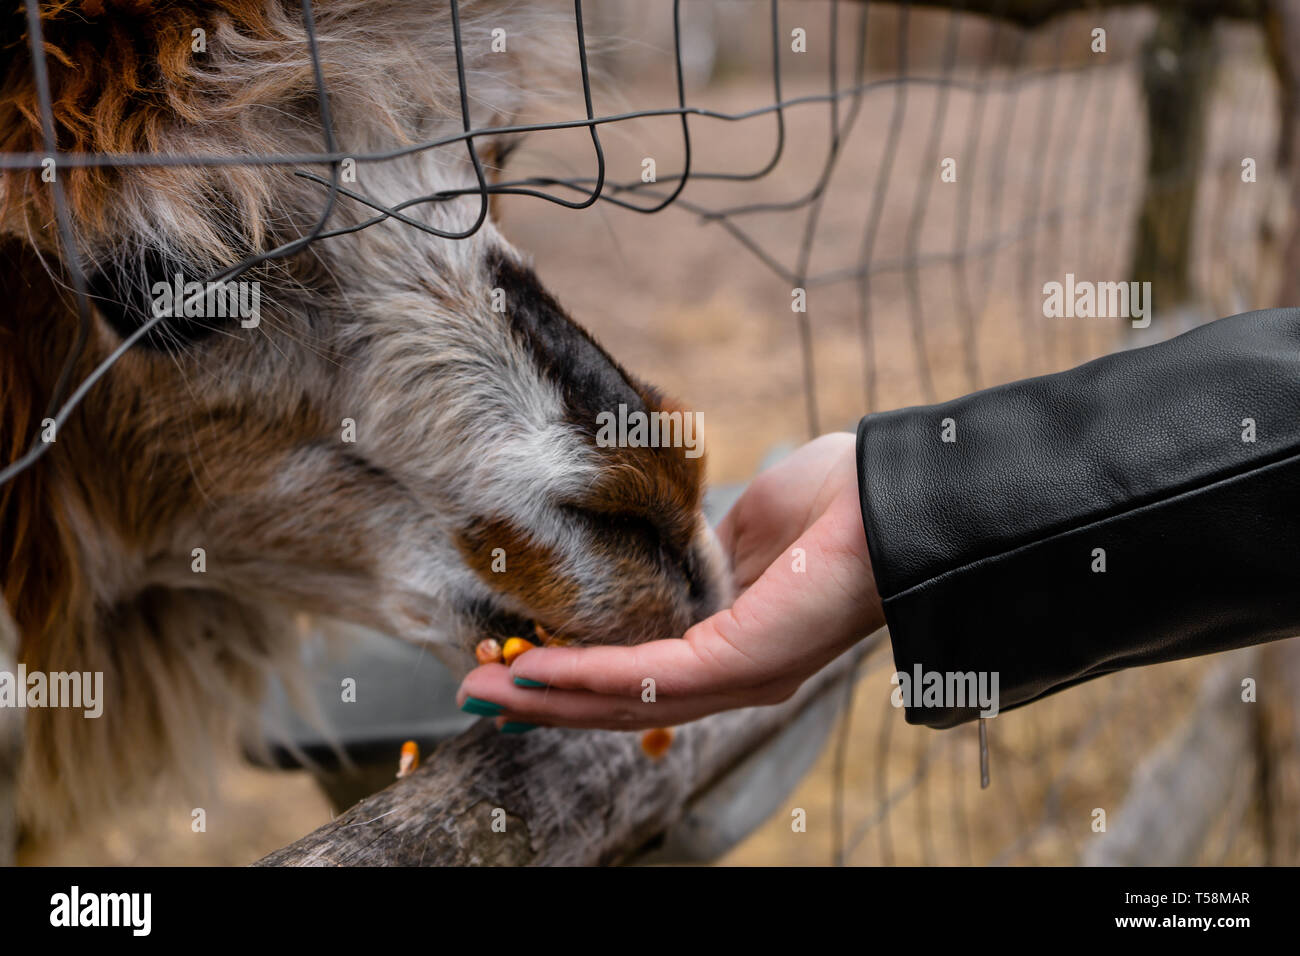 Alpaca at zoo eating from people's hand Stock Photo